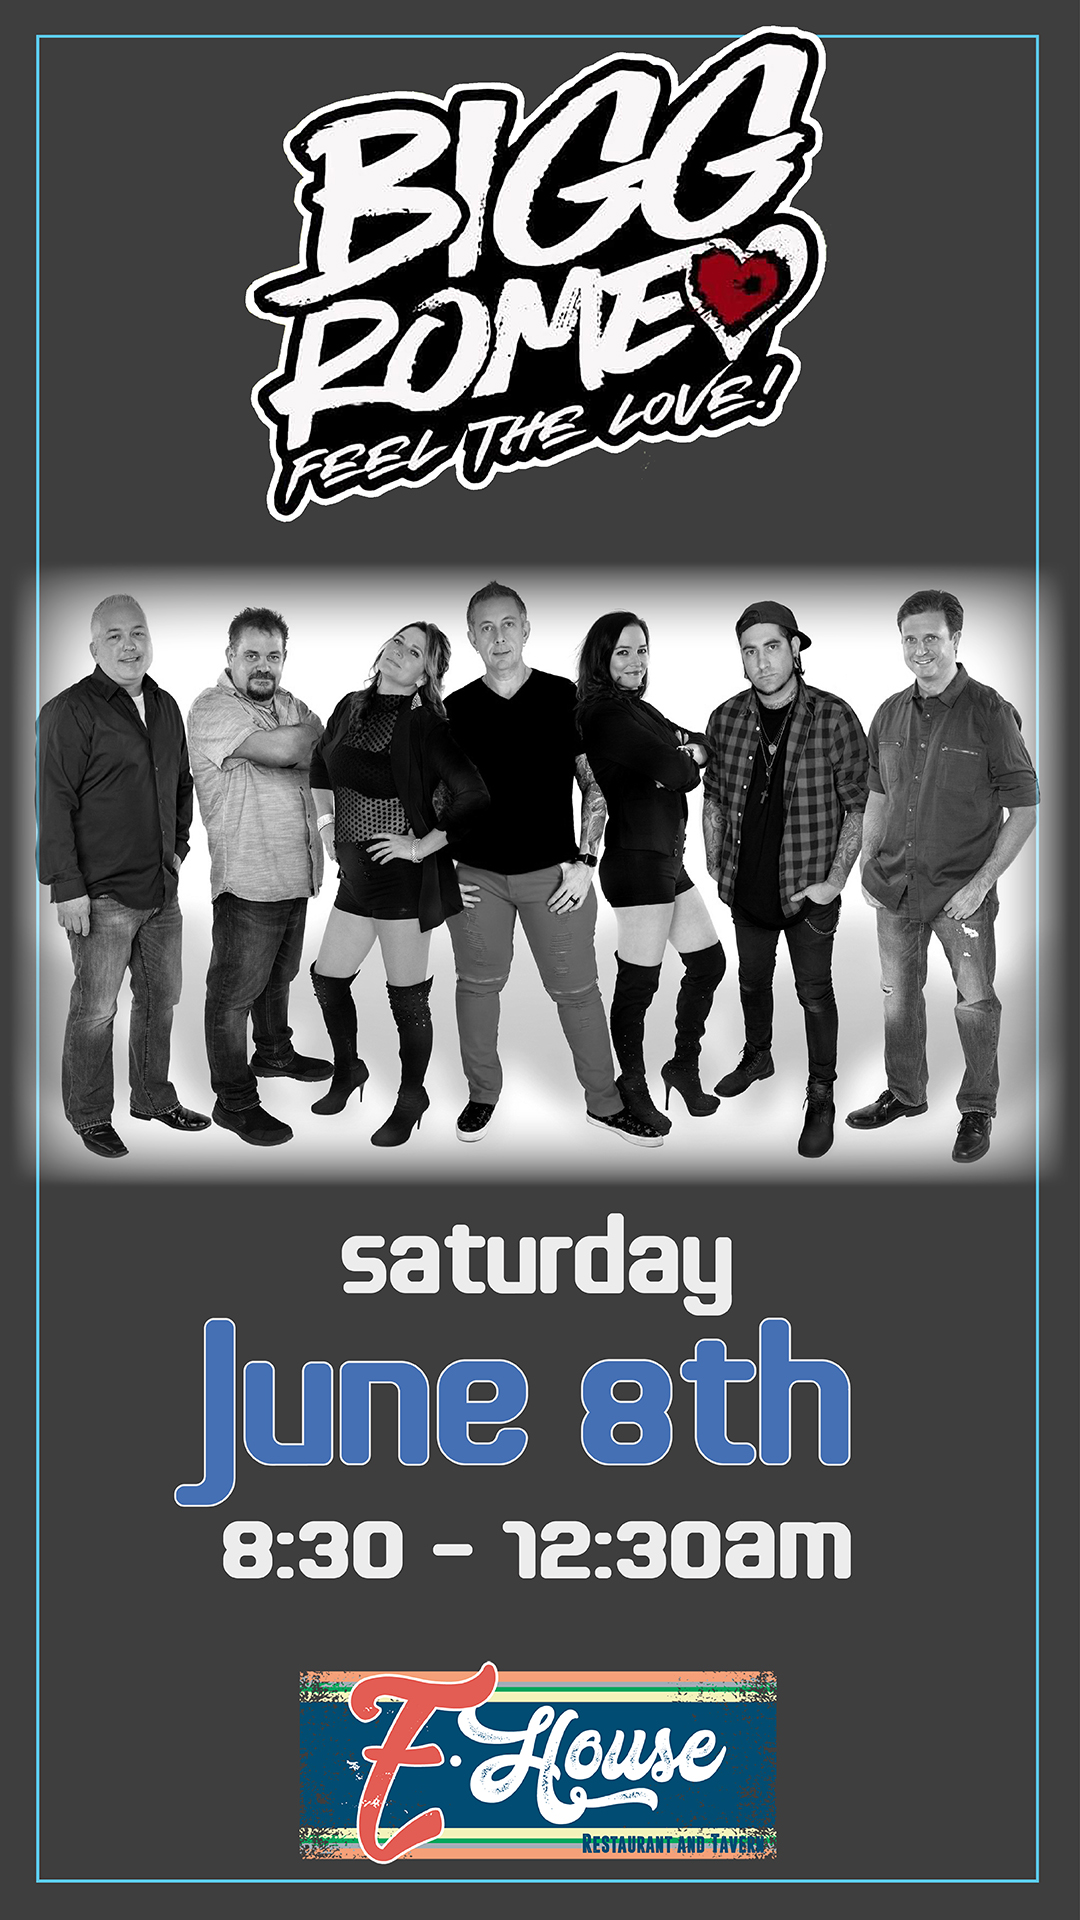 Poster for the band Bigg Rome advertising their performance on Saturday, June 8th from 8:30 PM to 12:30 AM at E House Restaurant and Tavern. The poster features a black-and-white photo of the band members.